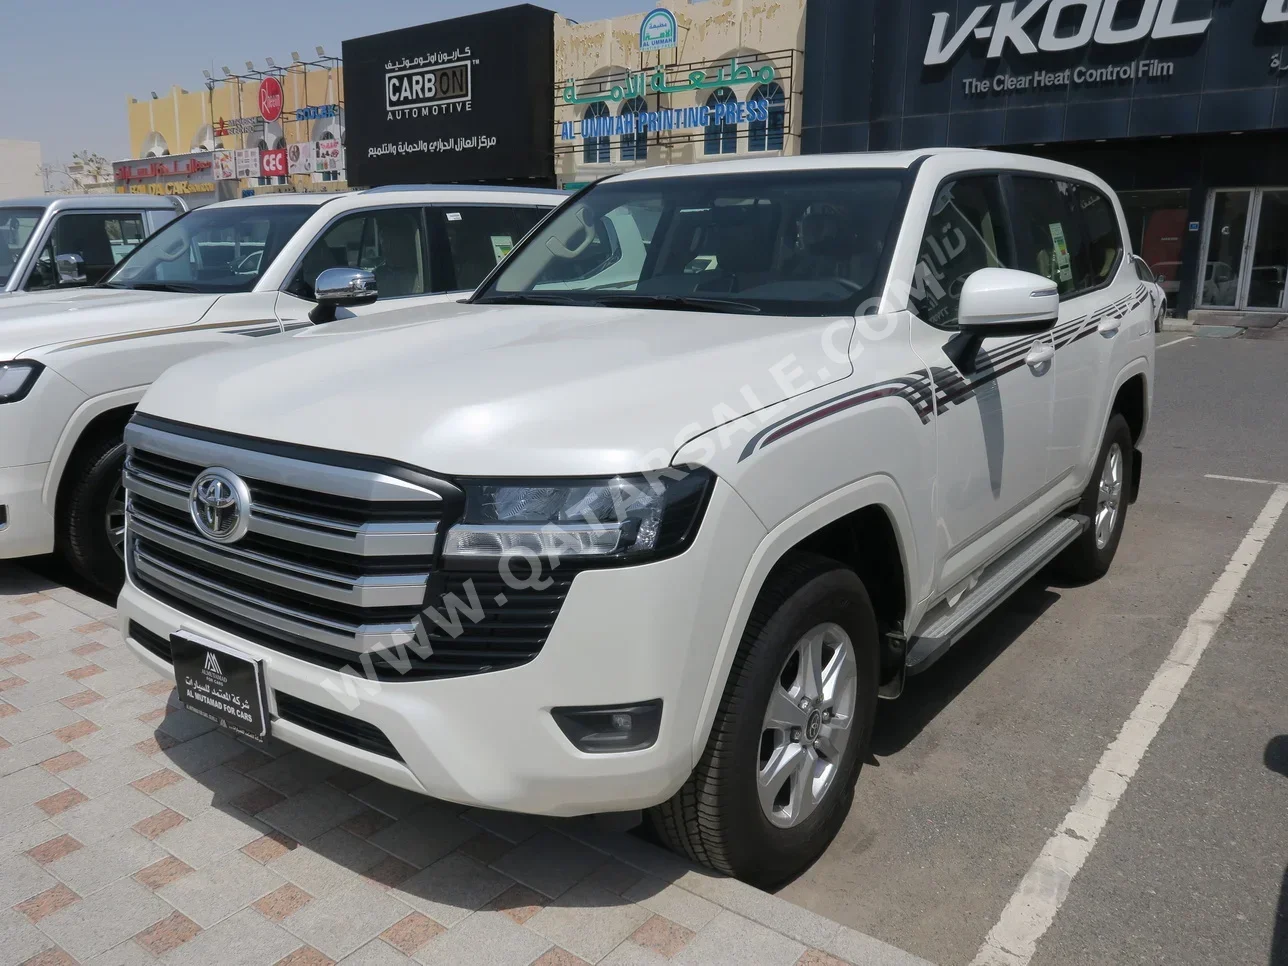 Toyota  Land Cruiser  GXR  2022  Automatic  0 Km  6 Cylinder  Four Wheel Drive (4WD)  SUV  White  With Warranty